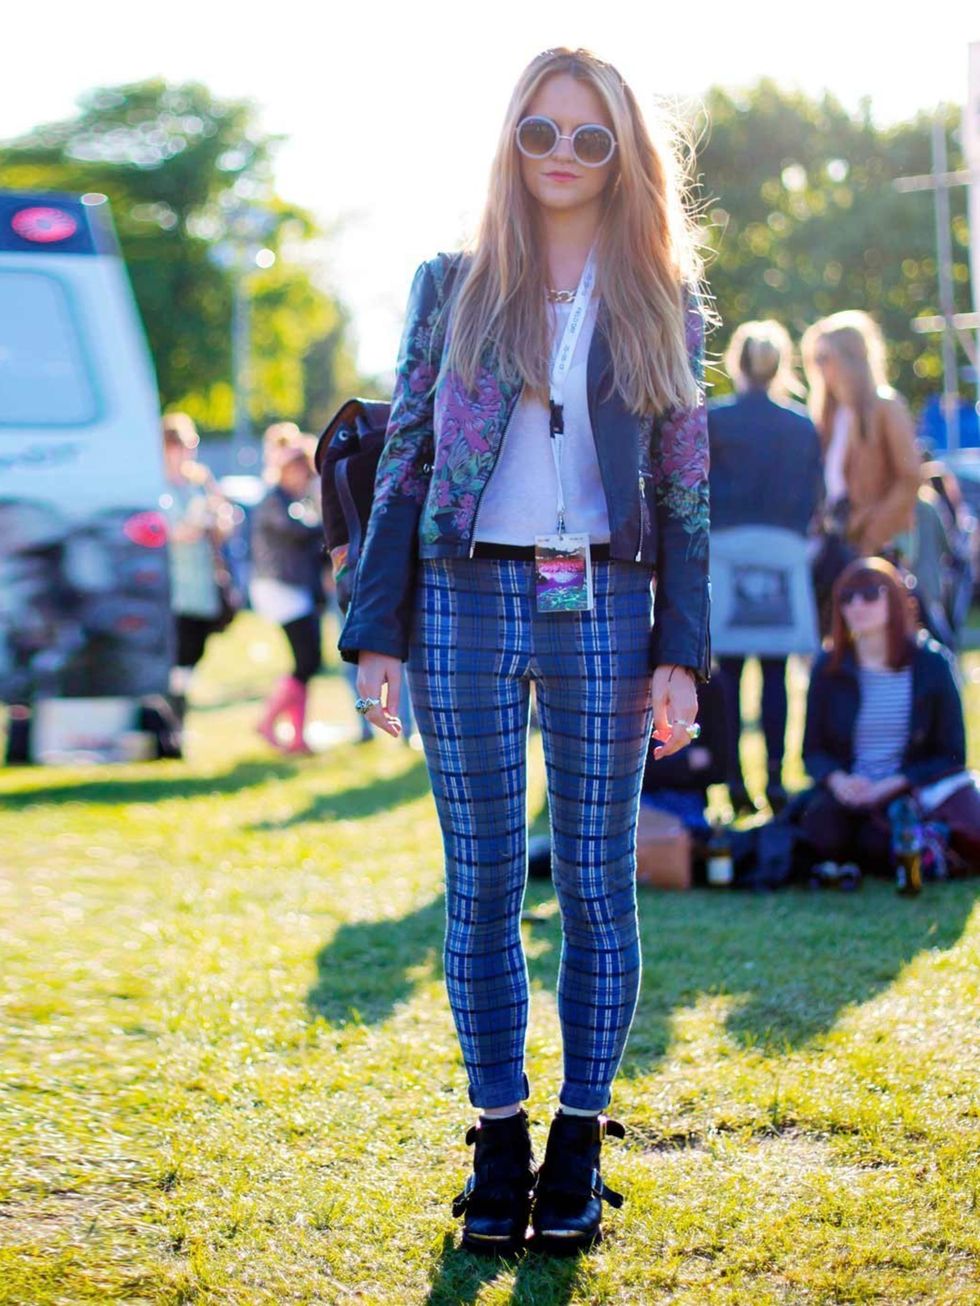 <p>Clare Wilson, 25, wearing jacket and trousers from <a href="http://www.elleuk.com/catwalk/designer-a-z/unique/autumn-winter-2013">Topshop</a> and a vintage bag.</p><p><a href="http://www.elleuk.com/travel/holiday-inspiration/the-elle-guide-to-festivals